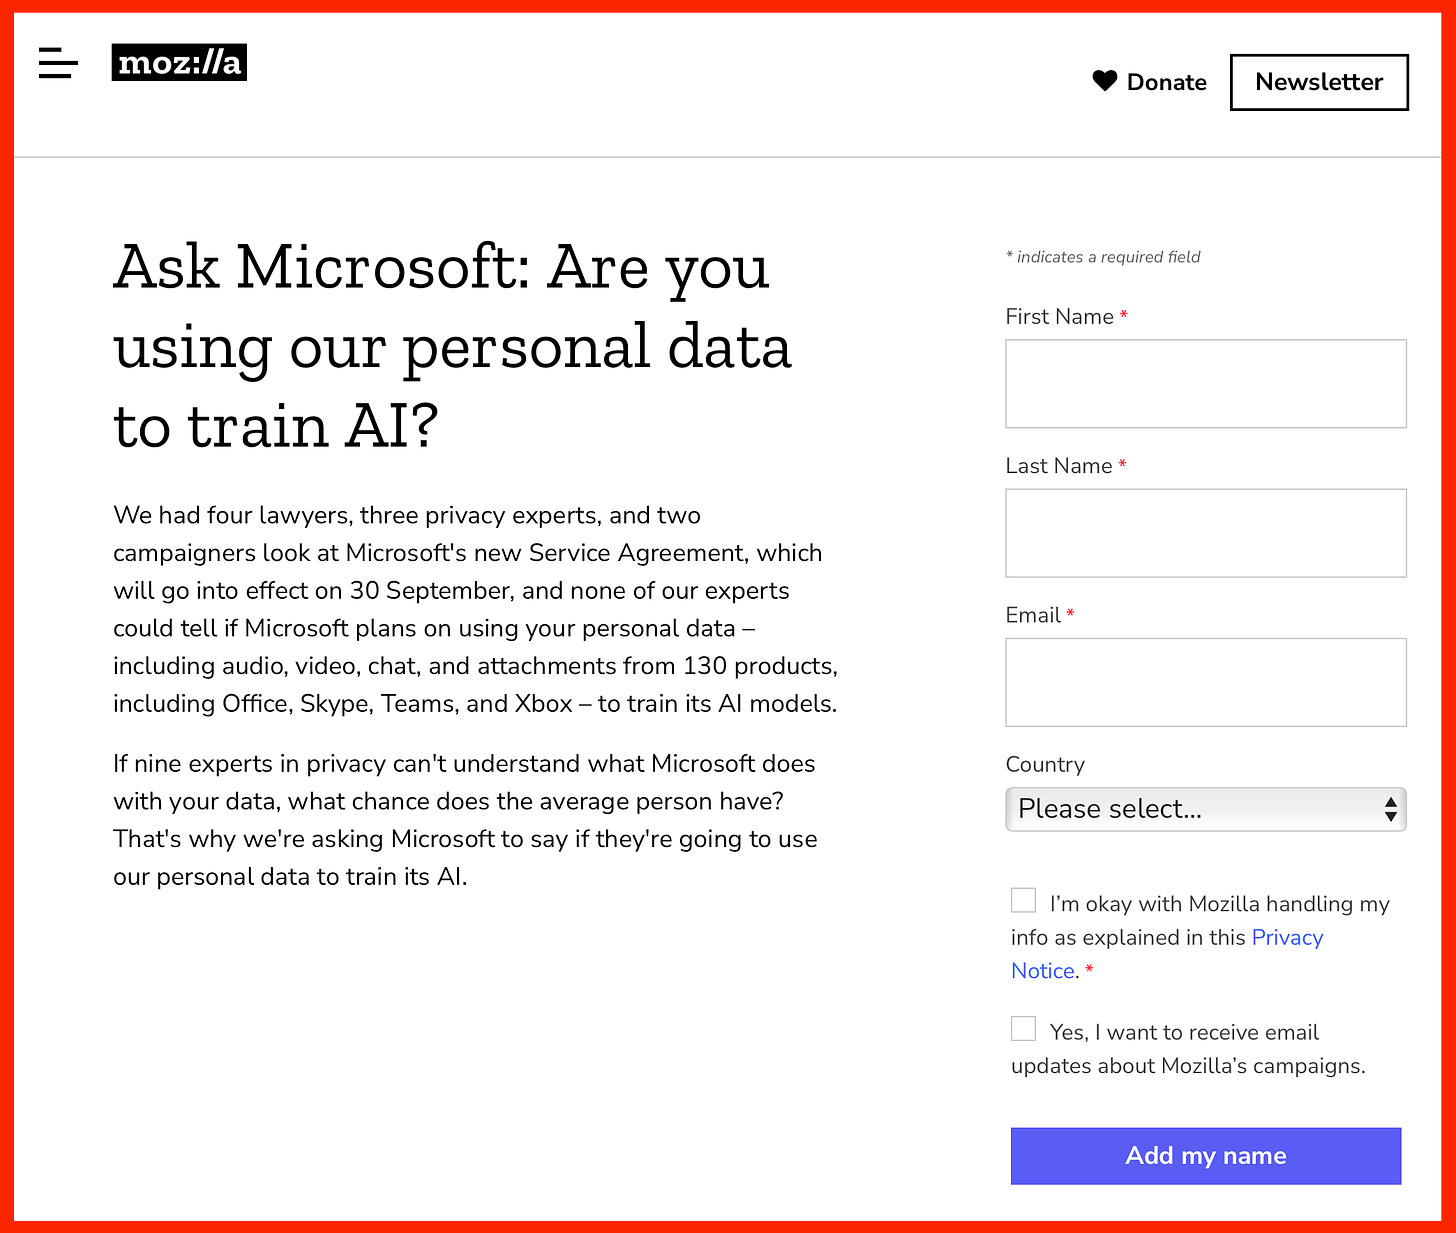 Ask Microsoft: Are you using our personal data to train AI? We had four lawyers, three privacy experts, and two campaigners look at Microsoft's new Service Agreement, which will go into effect on 30 September, and none of our experts could tell if Microsoft plans on using your personal data – including audio, video, chat, and attachments from 130 products, including Office, Skype, Teams, and Xbox – to train its AI models.  If nine experts in privacy can't understand what Microsoft does with your data, what chance does the average person have? That's why we're asking Microsoft to say if they're going to use our personal data to train its AI.